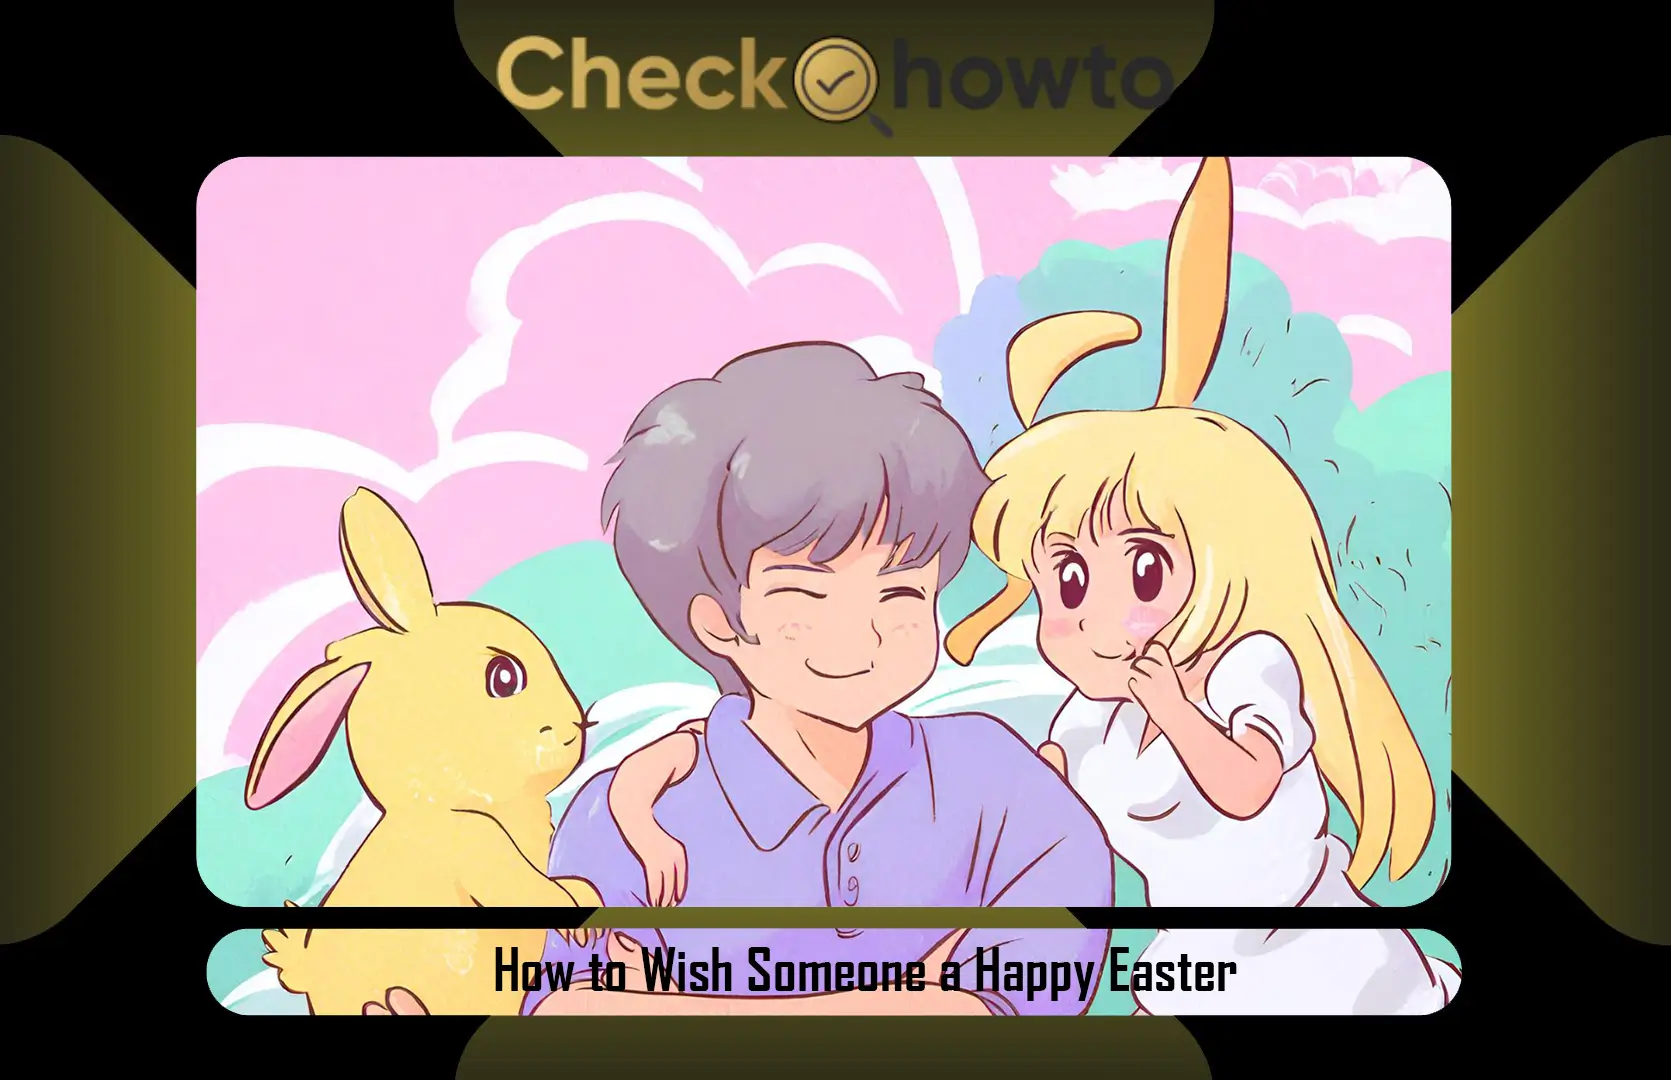 How to Wish Someone a Happy Easter